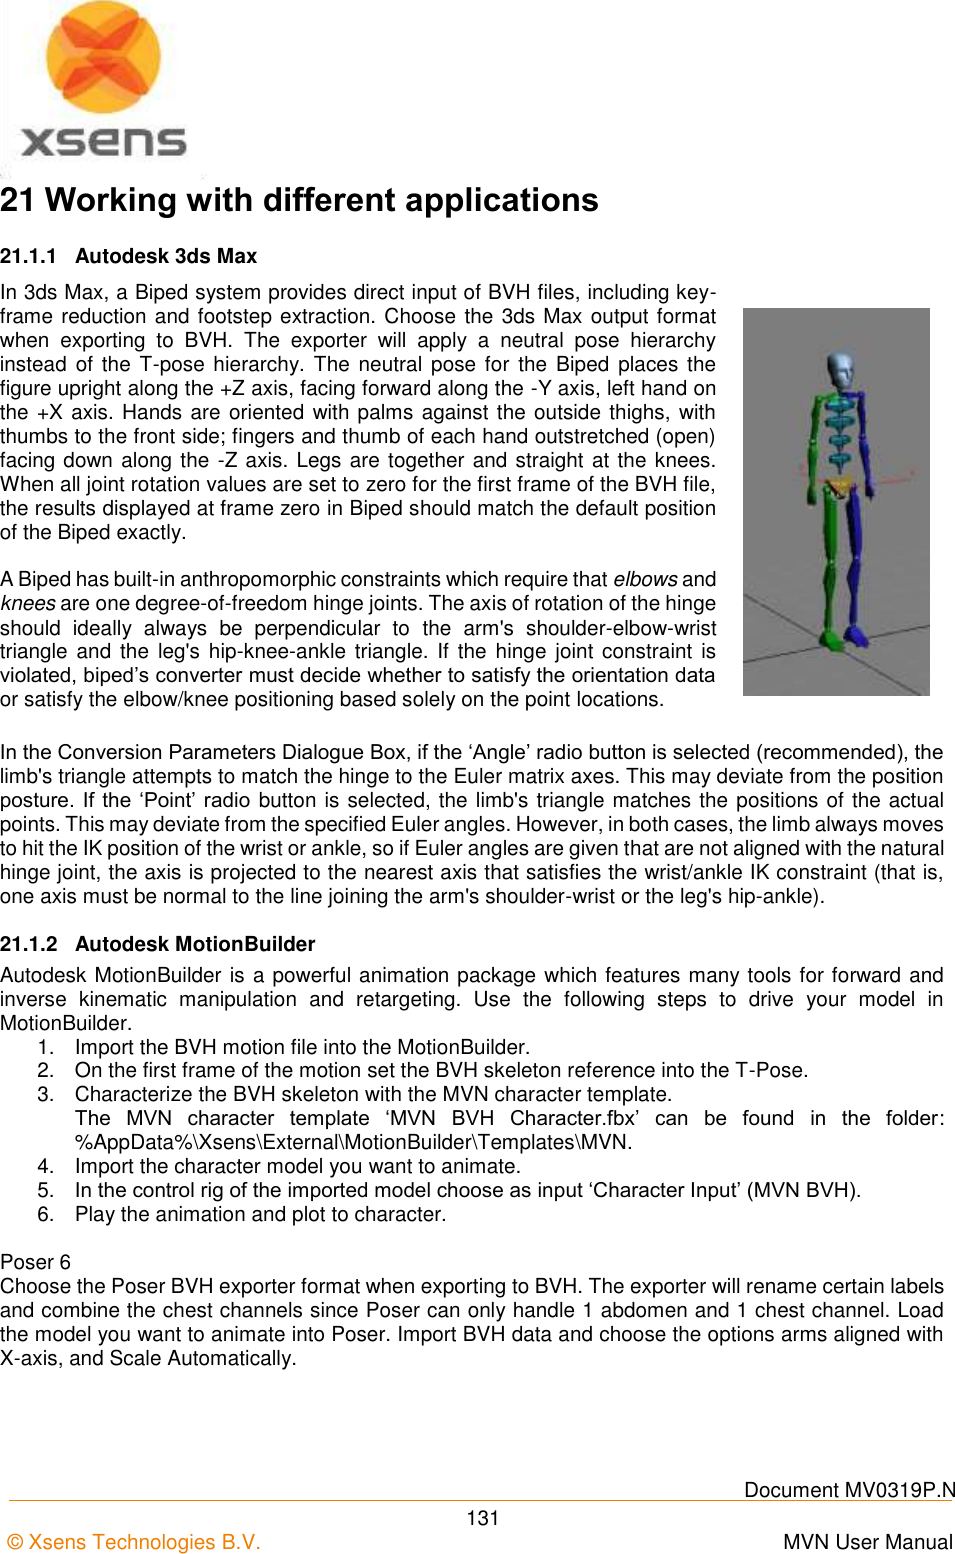    Document MV0319P.N © Xsens Technologies B.V.      MVN User Manual  131 21 Working with different applications 21.1.1  Autodesk 3ds Max In 3ds Max, a Biped system provides direct input of BVH files, including key-frame reduction and footstep extraction. Choose the 3ds Max output format when  exporting  to  BVH.  The  exporter  will  apply  a  neutral  pose  hierarchy instead  of  the  T-pose hierarchy.  The  neutral pose  for the Biped places the figure upright along the +Z axis, facing forward along the -Y axis, left hand on the +X axis. Hands are oriented with palms against the outside thighs, with thumbs to the front side; fingers and thumb of each hand outstretched (open) facing down along the -Z axis. Legs are together and straight at the knees. When all joint rotation values are set to zero for the first frame of the BVH file, the results displayed at frame zero in Biped should match the default position of the Biped exactly.  A Biped has built-in anthropomorphic constraints which require that elbows and knees are one degree-of-freedom hinge joints. The axis of rotation of the hinge should  ideally  always  be  perpendicular  to  the  arm&apos;s  shoulder-elbow-wrist triangle and the leg&apos;s hip-knee-ankle  triangle. If the hinge joint constraint  is violated, biped’s converter must decide whether to satisfy the orientation data or satisfy the elbow/knee positioning based solely on the point locations.    In the Conversion Parameters Dialogue Box, if the ‘Angle’ radio button is selected (recommended), the limb&apos;s triangle attempts to match the hinge to the Euler matrix axes. This may deviate from the position posture. If the ‘Point’ radio button is selected, the limb&apos;s triangle matches the positions of the actual points. This may deviate from the specified Euler angles. However, in both cases, the limb always moves to hit the IK position of the wrist or ankle, so if Euler angles are given that are not aligned with the natural hinge joint, the axis is projected to the nearest axis that satisfies the wrist/ankle IK constraint (that is, one axis must be normal to the line joining the arm&apos;s shoulder-wrist or the leg&apos;s hip-ankle). 21.1.2  Autodesk MotionBuilder Autodesk MotionBuilder is a powerful animation package which features many tools for forward and inverse  kinematic  manipulation  and  retargeting.  Use  the  following  steps  to  drive  your  model  in MotionBuilder. 1.  Import the BVH motion file into the MotionBuilder. 2.  On the first frame of the motion set the BVH skeleton reference into the T-Pose. 3.  Characterize the BVH skeleton with the MVN character template. The  MVN  character  template  ‘MVN  BVH  Character.fbx’  can  be  found  in  the  folder: %AppData%\Xsens\External\MotionBuilder\Templates\MVN. 4.  Import the character model you want to animate. 5. In the control rig of the imported model choose as input ‘Character Input’ (MVN BVH). 6.  Play the animation and plot to character.  Poser 6 Choose the Poser BVH exporter format when exporting to BVH. The exporter will rename certain labels and combine the chest channels since Poser can only handle 1 abdomen and 1 chest channel. Load the model you want to animate into Poser. Import BVH data and choose the options arms aligned with X-axis, and Scale Automatically.  